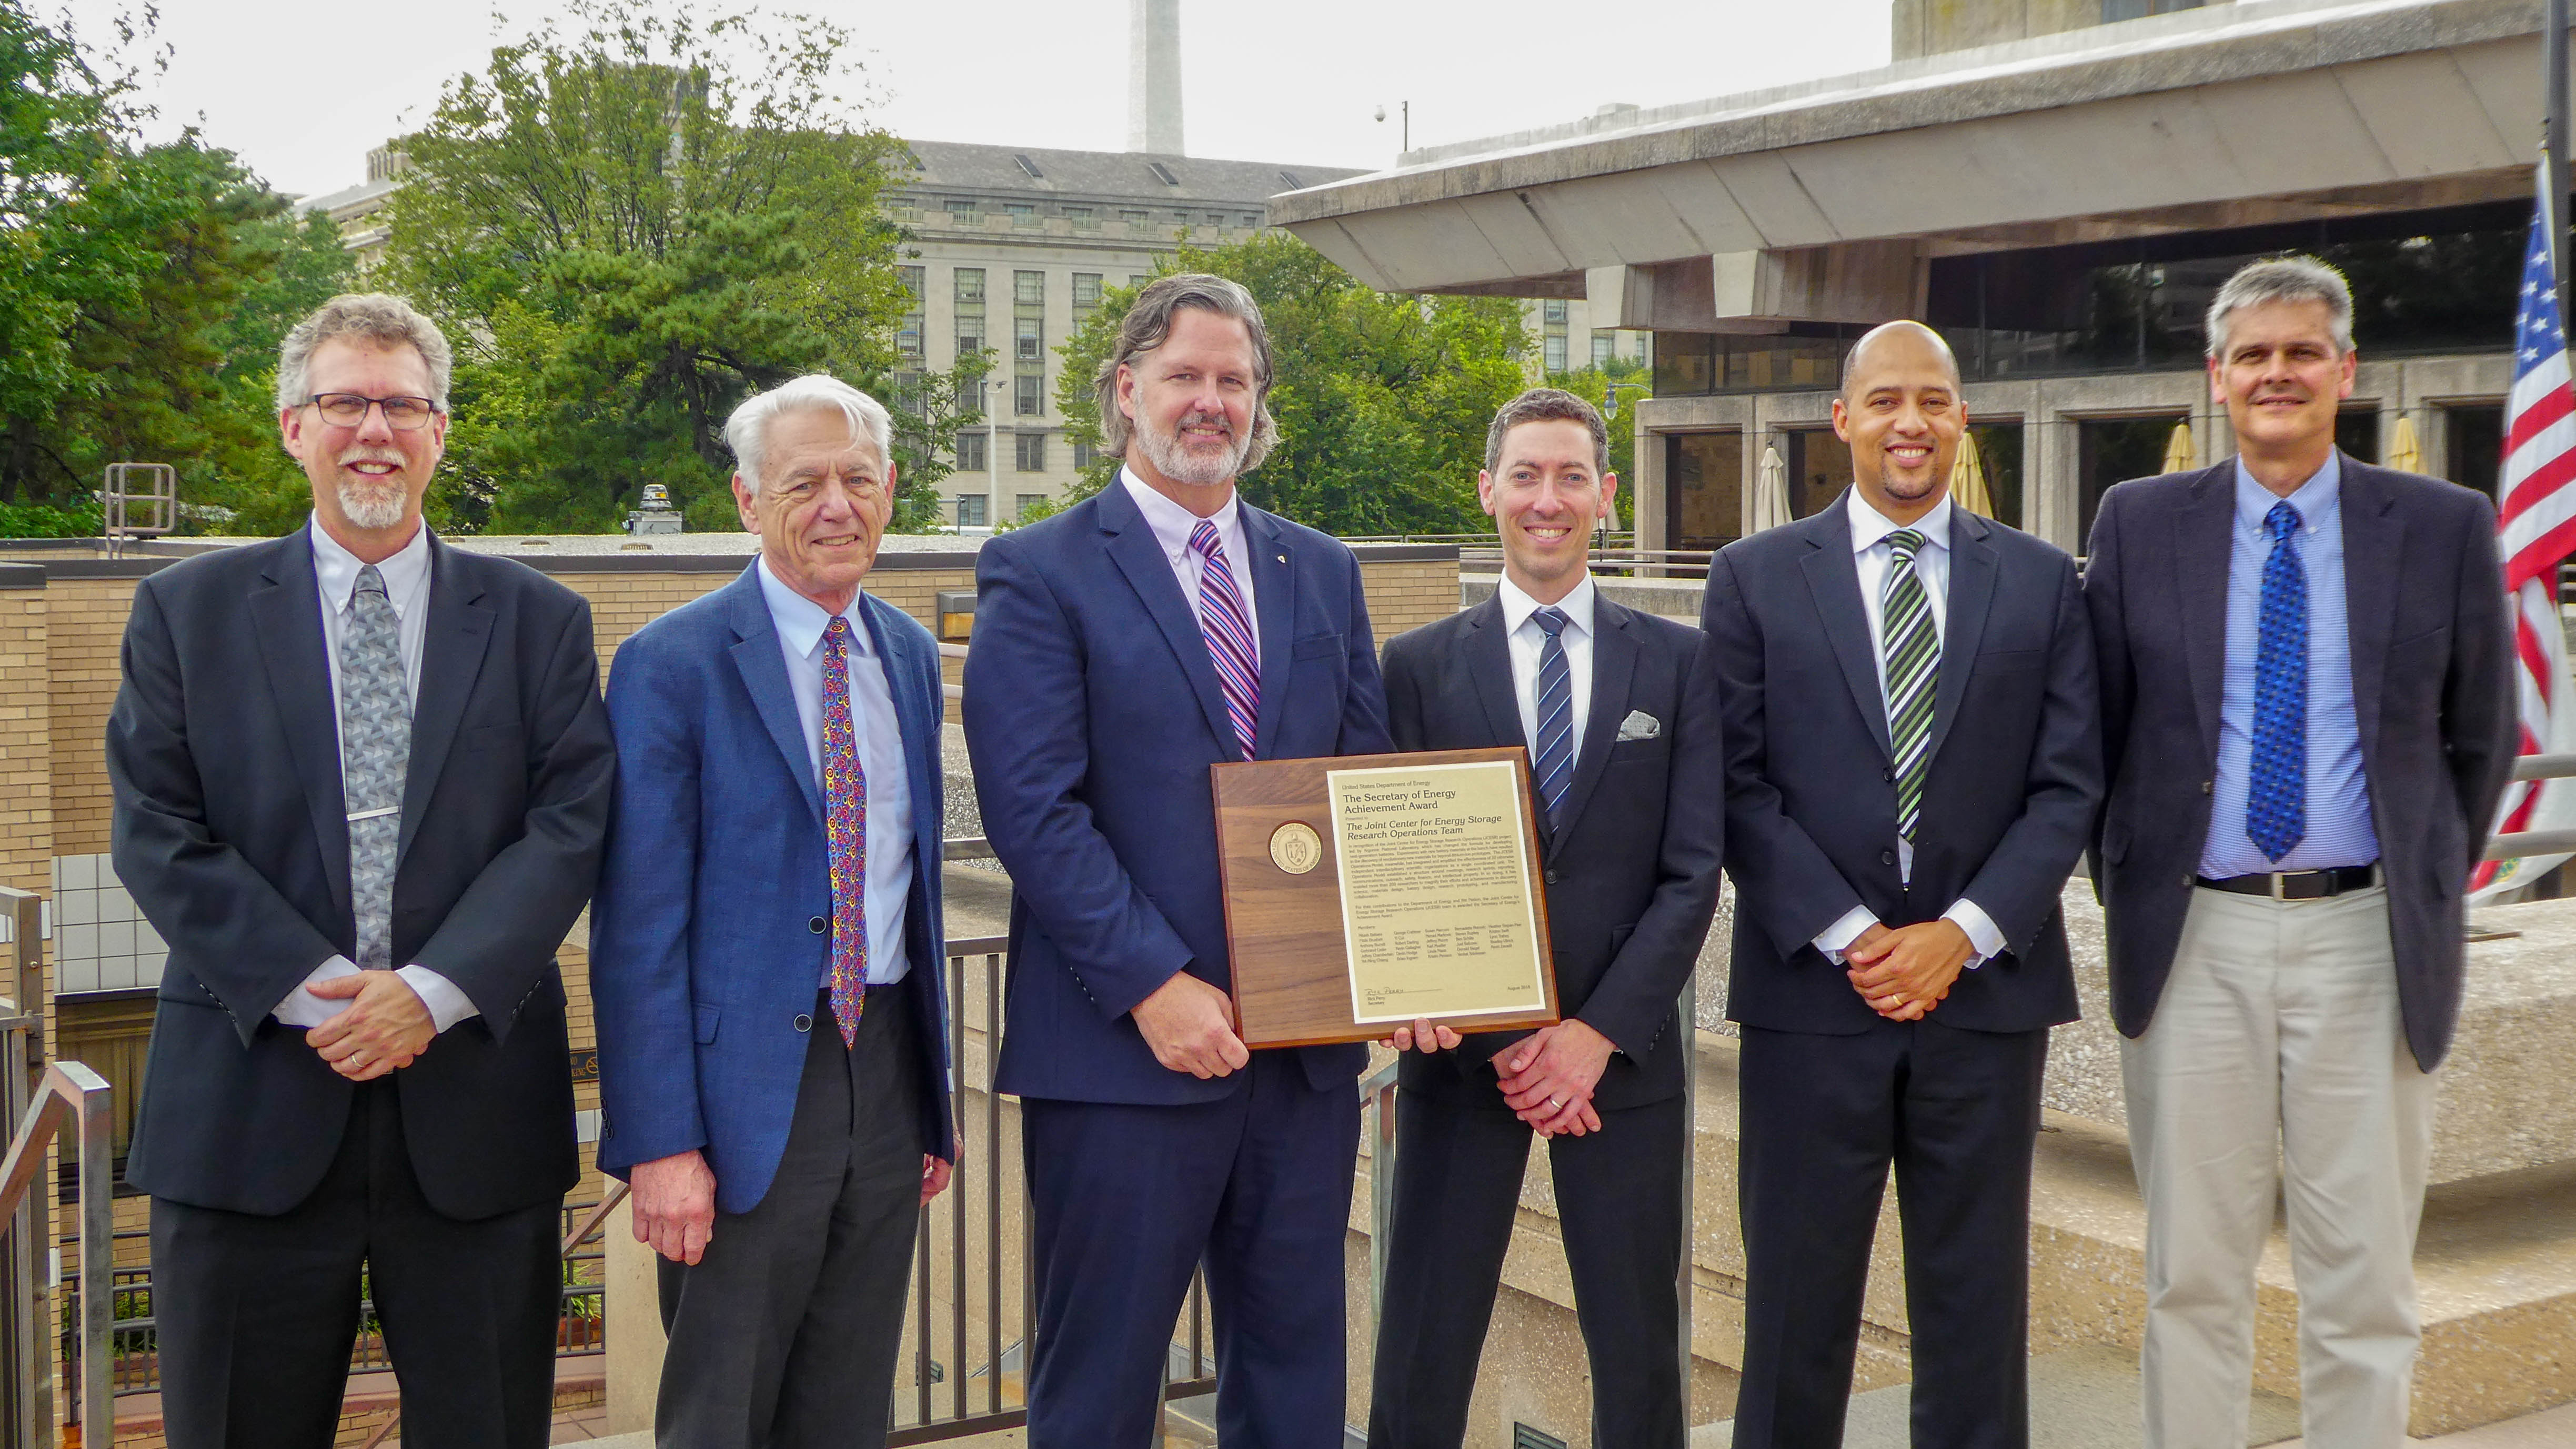 Karl Mueller, George Crabtree, Devin Hodge, Brian Ingram, Fikile Brushett and Kevin Zavadil accepted the Secretary of Energy’s Achievement Award on behalf of the 29 individuals who received the award.